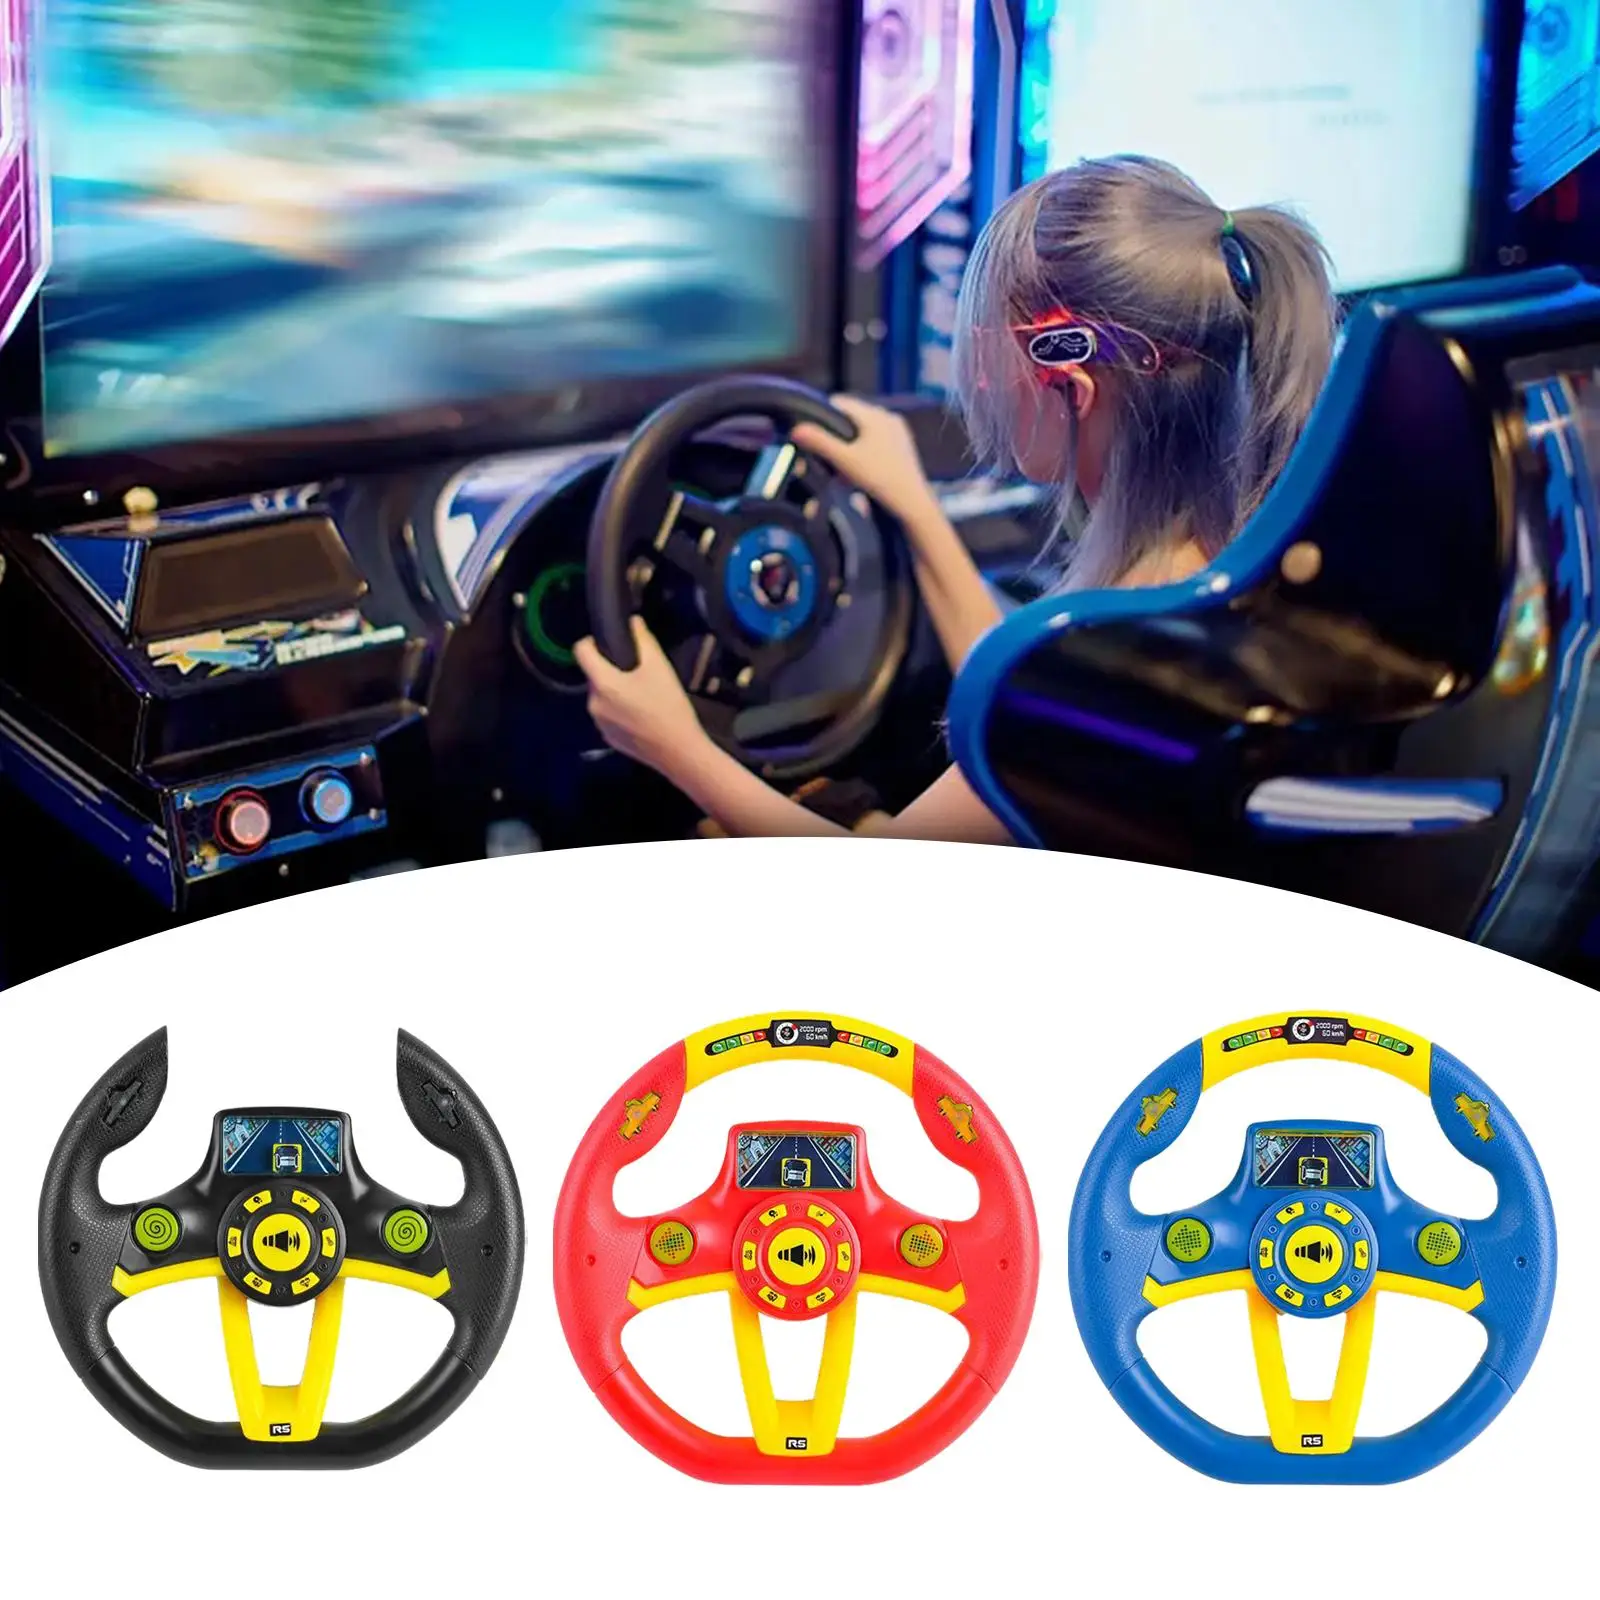 Round Steering Wheel Toy Busy Edge DIY Accessory Electric Steering Wheel Toy for